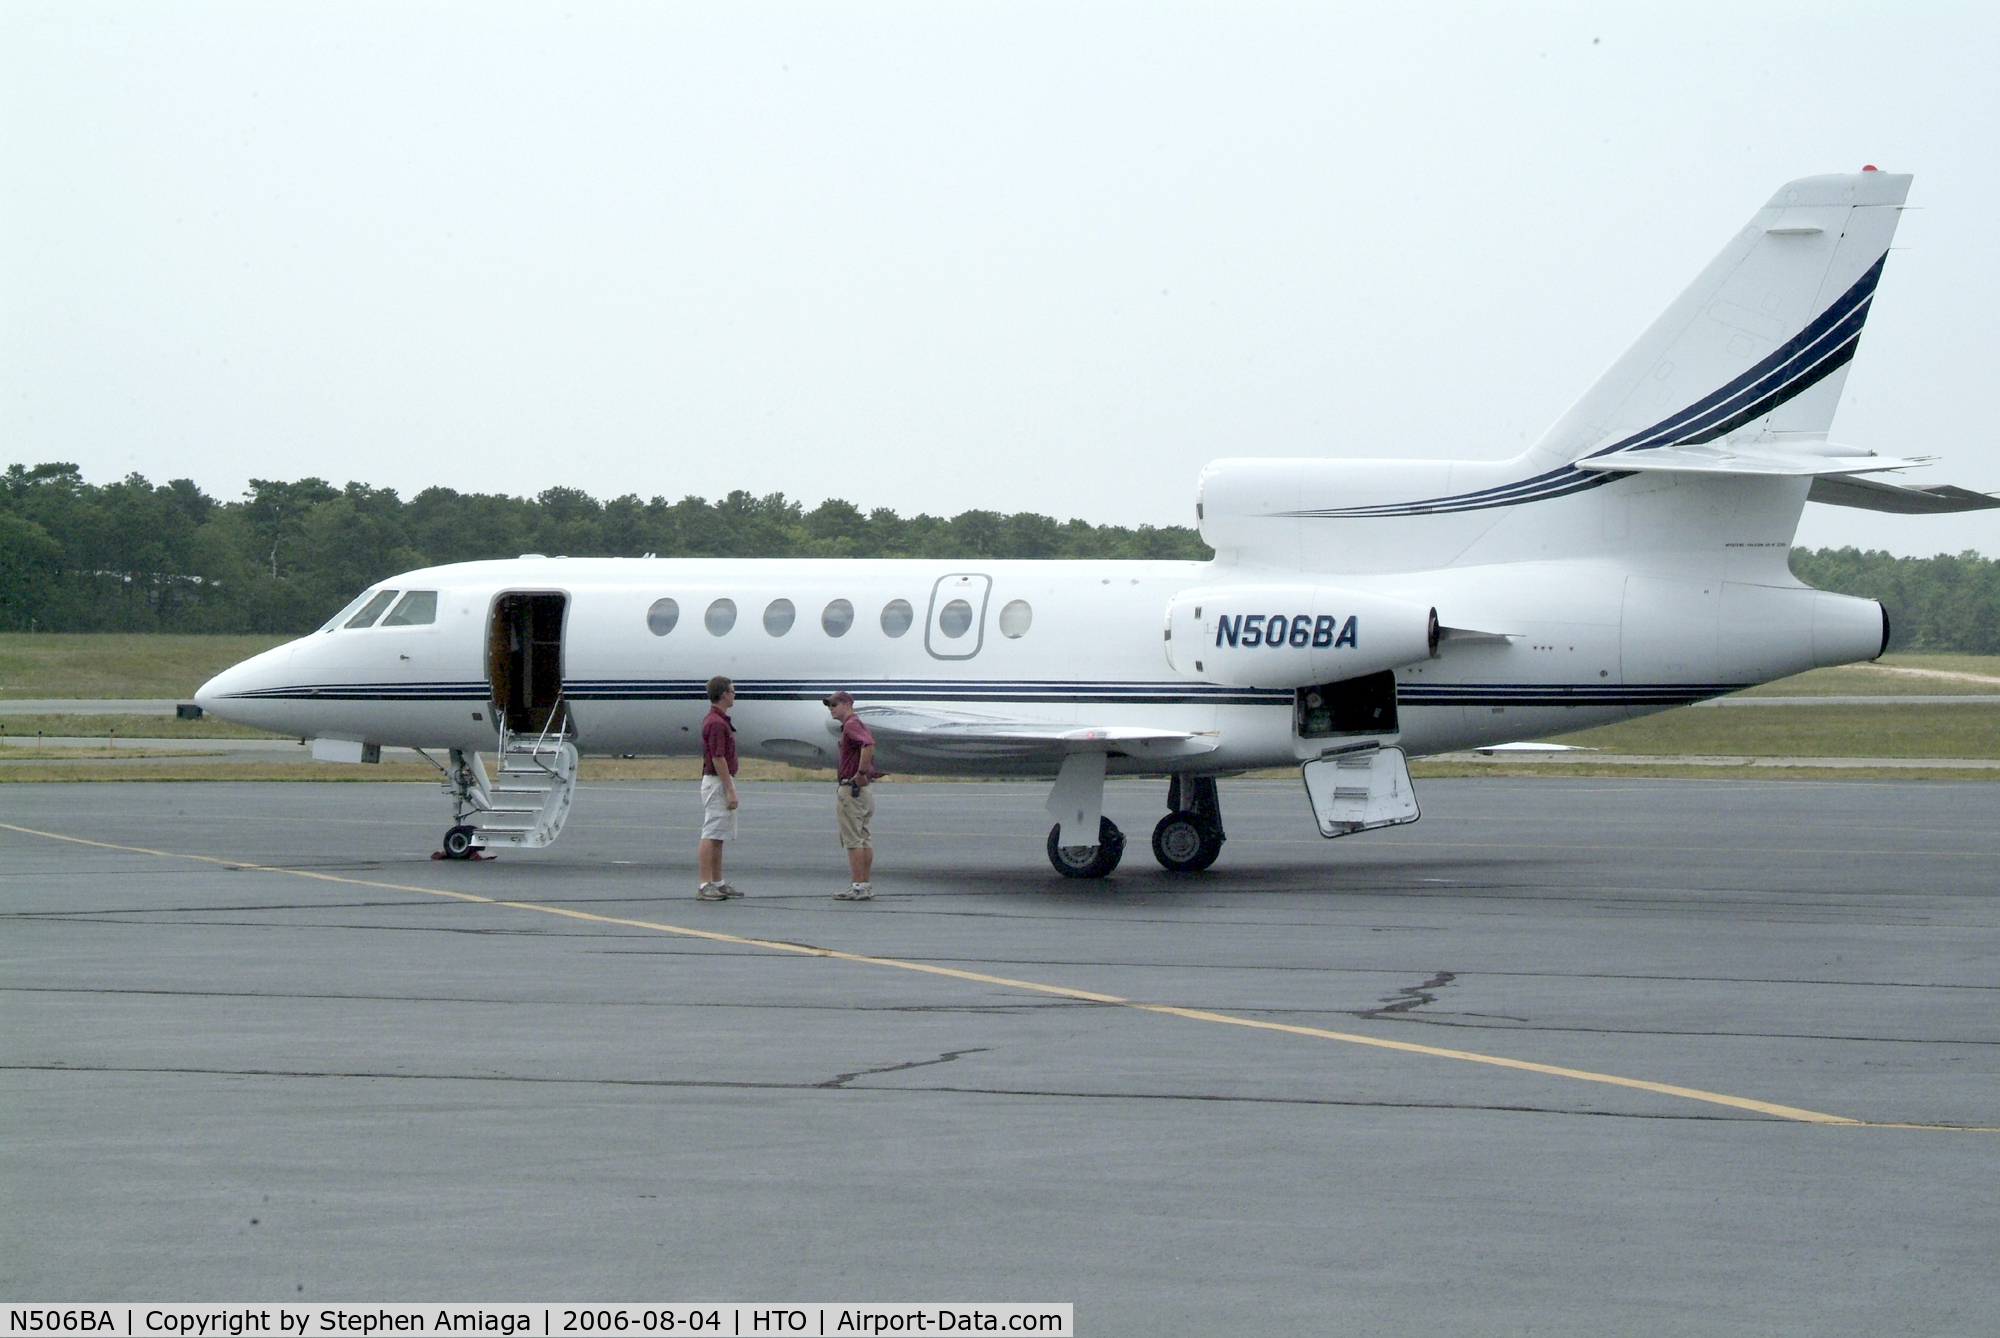 N506BA, 1996 Dassault Falcon 900B C/N 160, This Falcon 50 arrived taking someone to HTO for the weekend...